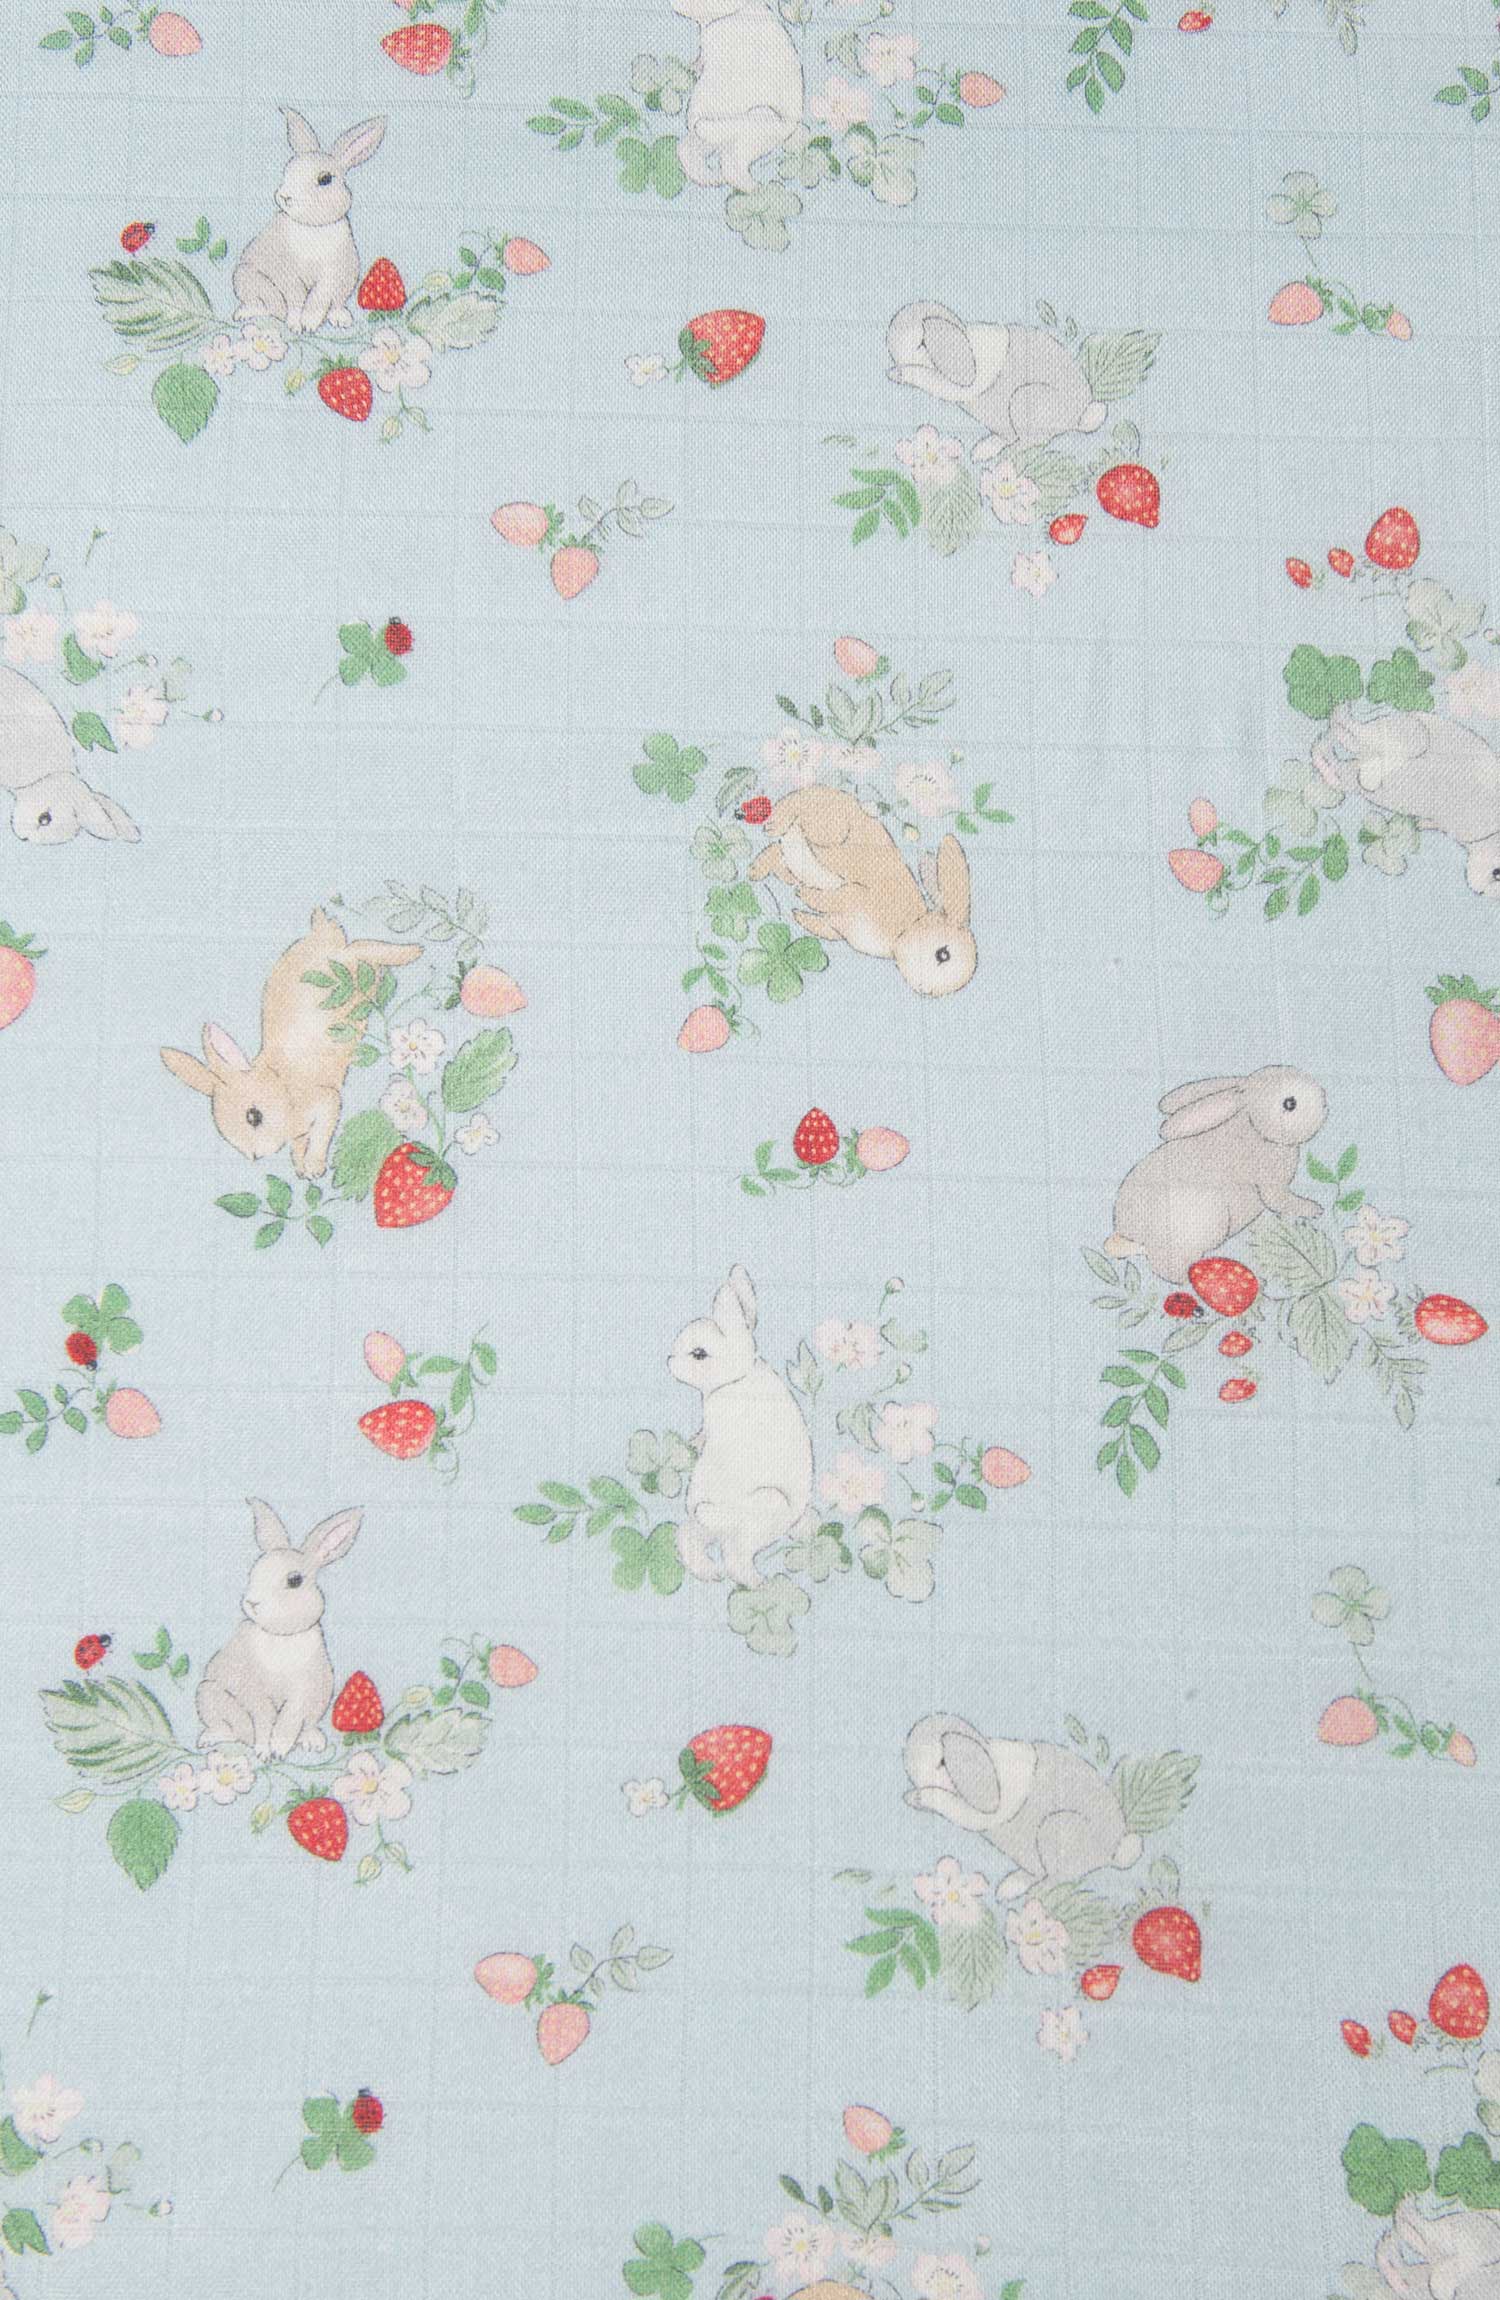 Loulou Lollipop Bamboo Muslin Swaddle Blanket - Some Bunny Love You